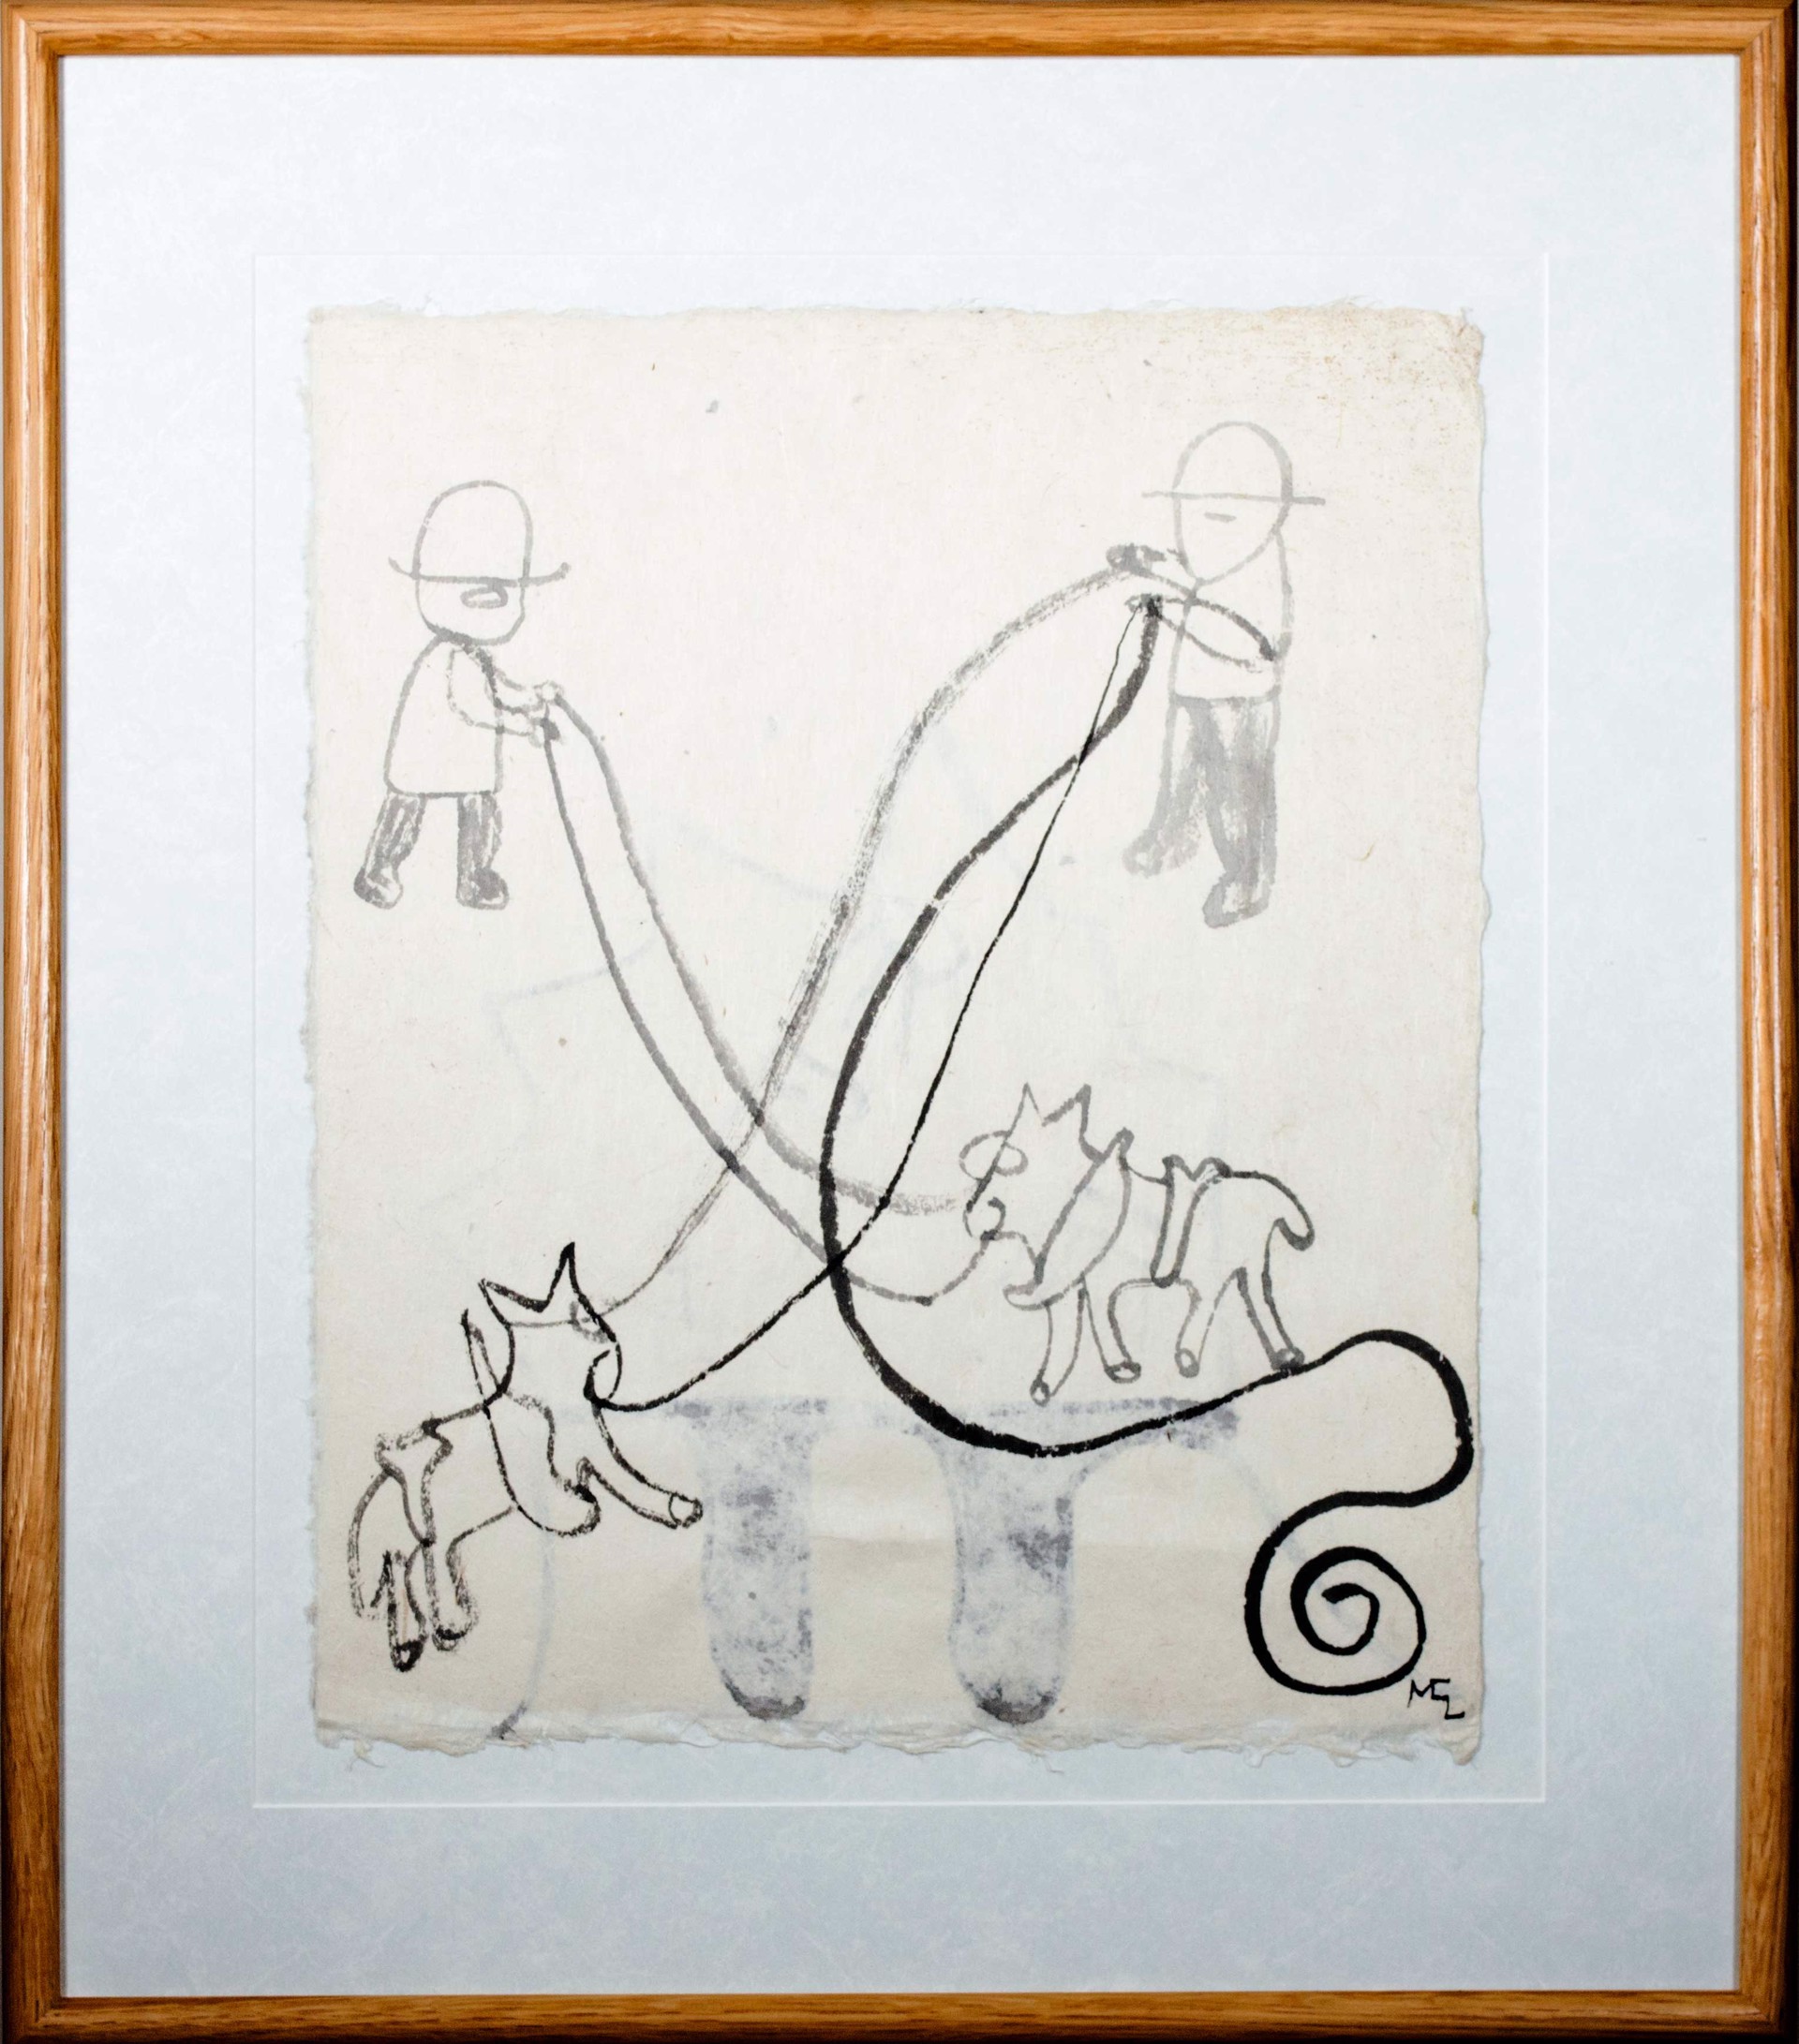 Plow Horses 2nd Ink Drawing on reverse by Miguel-Castro Leñero